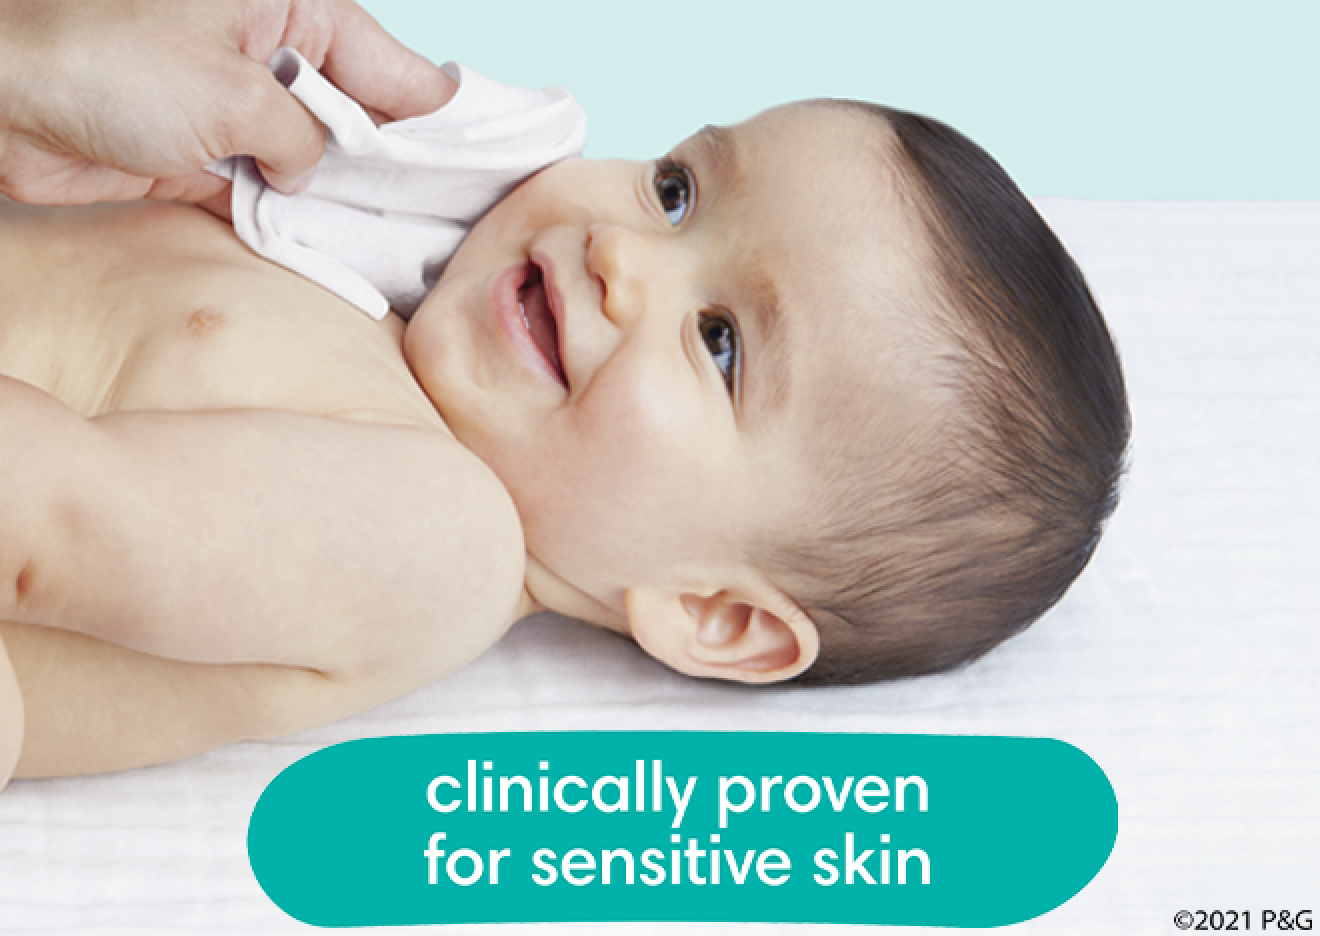 Pampers Sensitive Wipes are clinically proven sensitive on skin